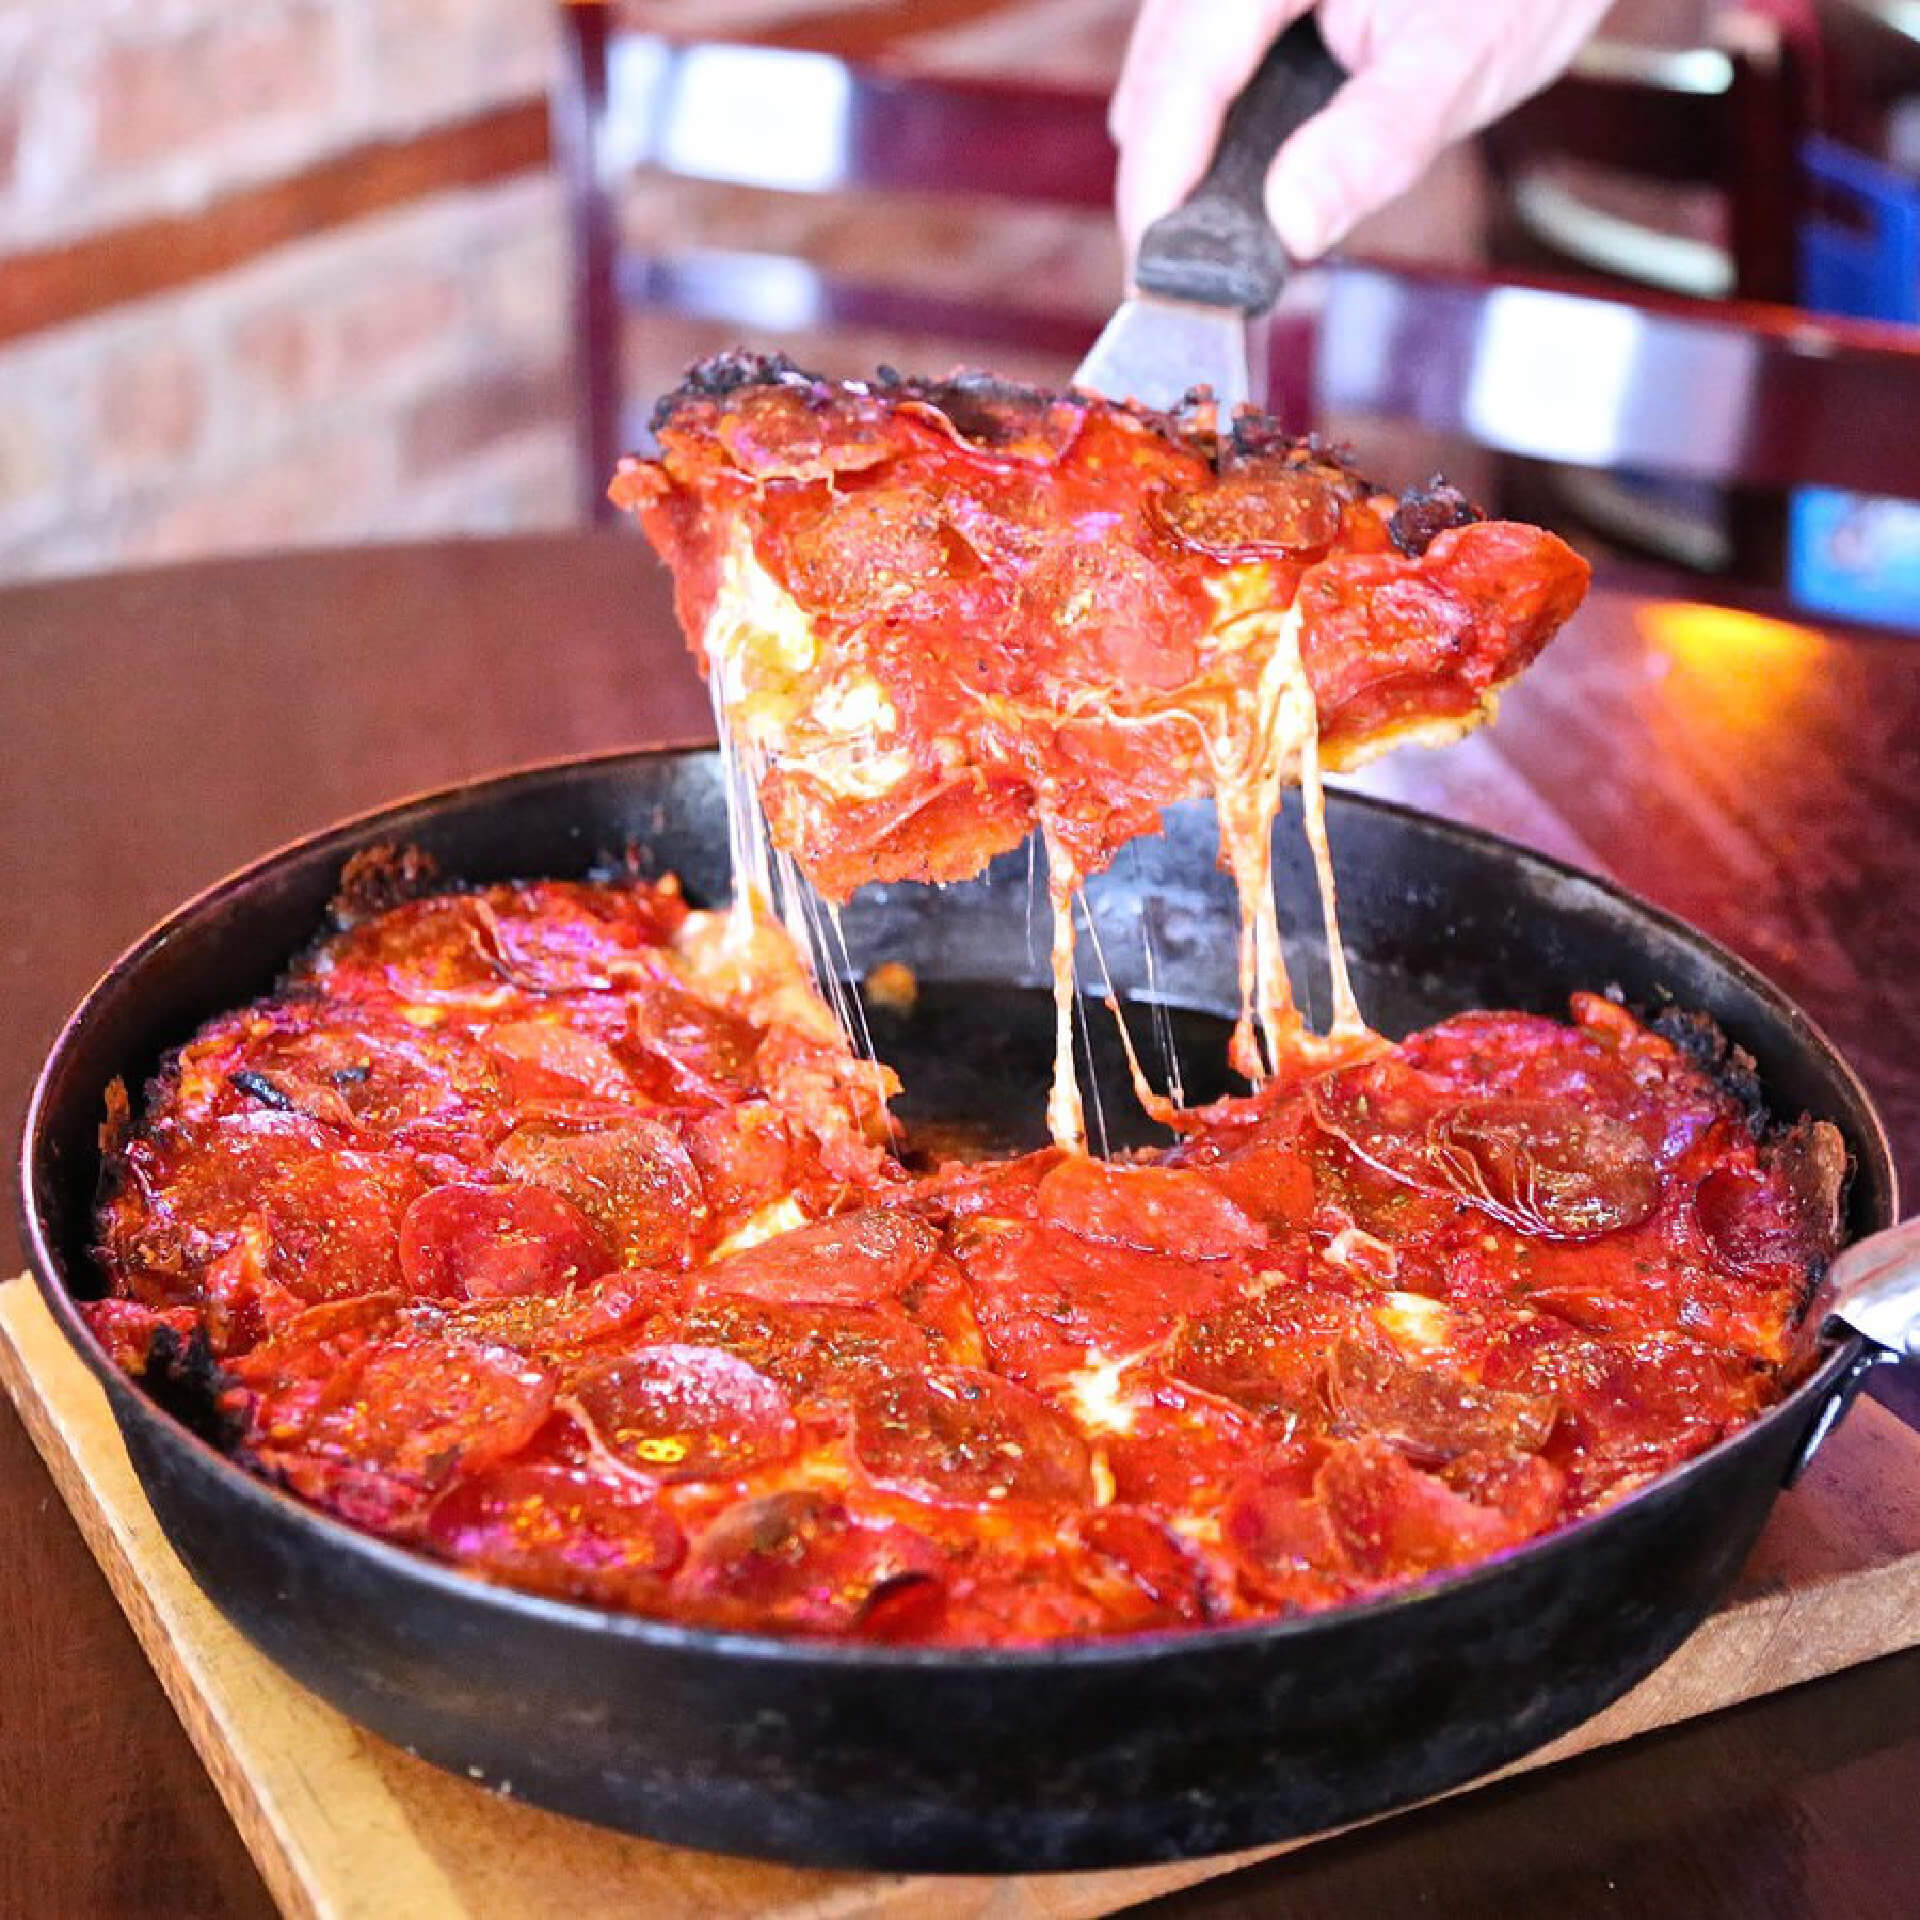 Chicago style deep dish pizza served at Pequods